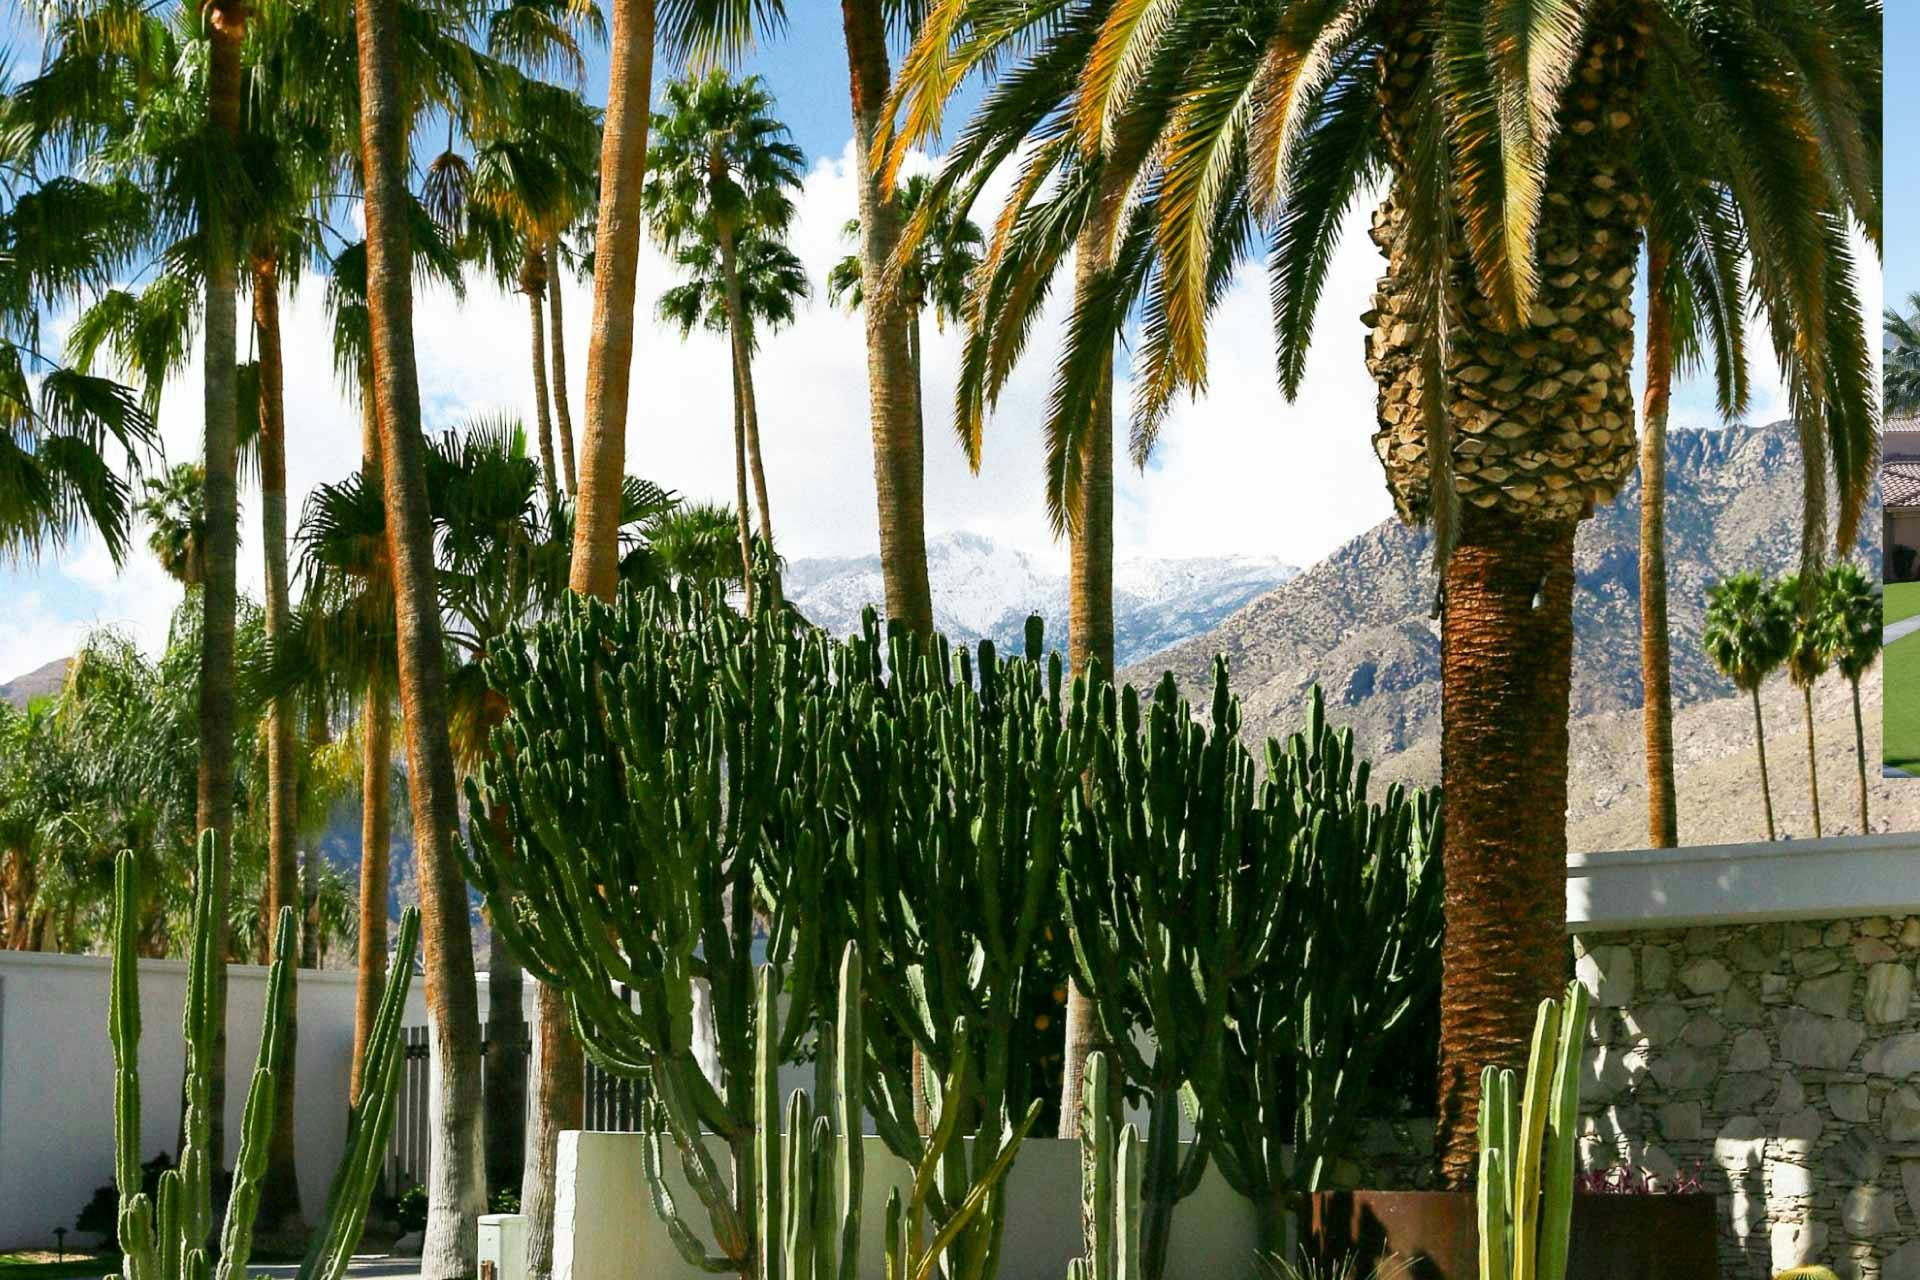 cactus-and-palm-trees-of-palm-springs